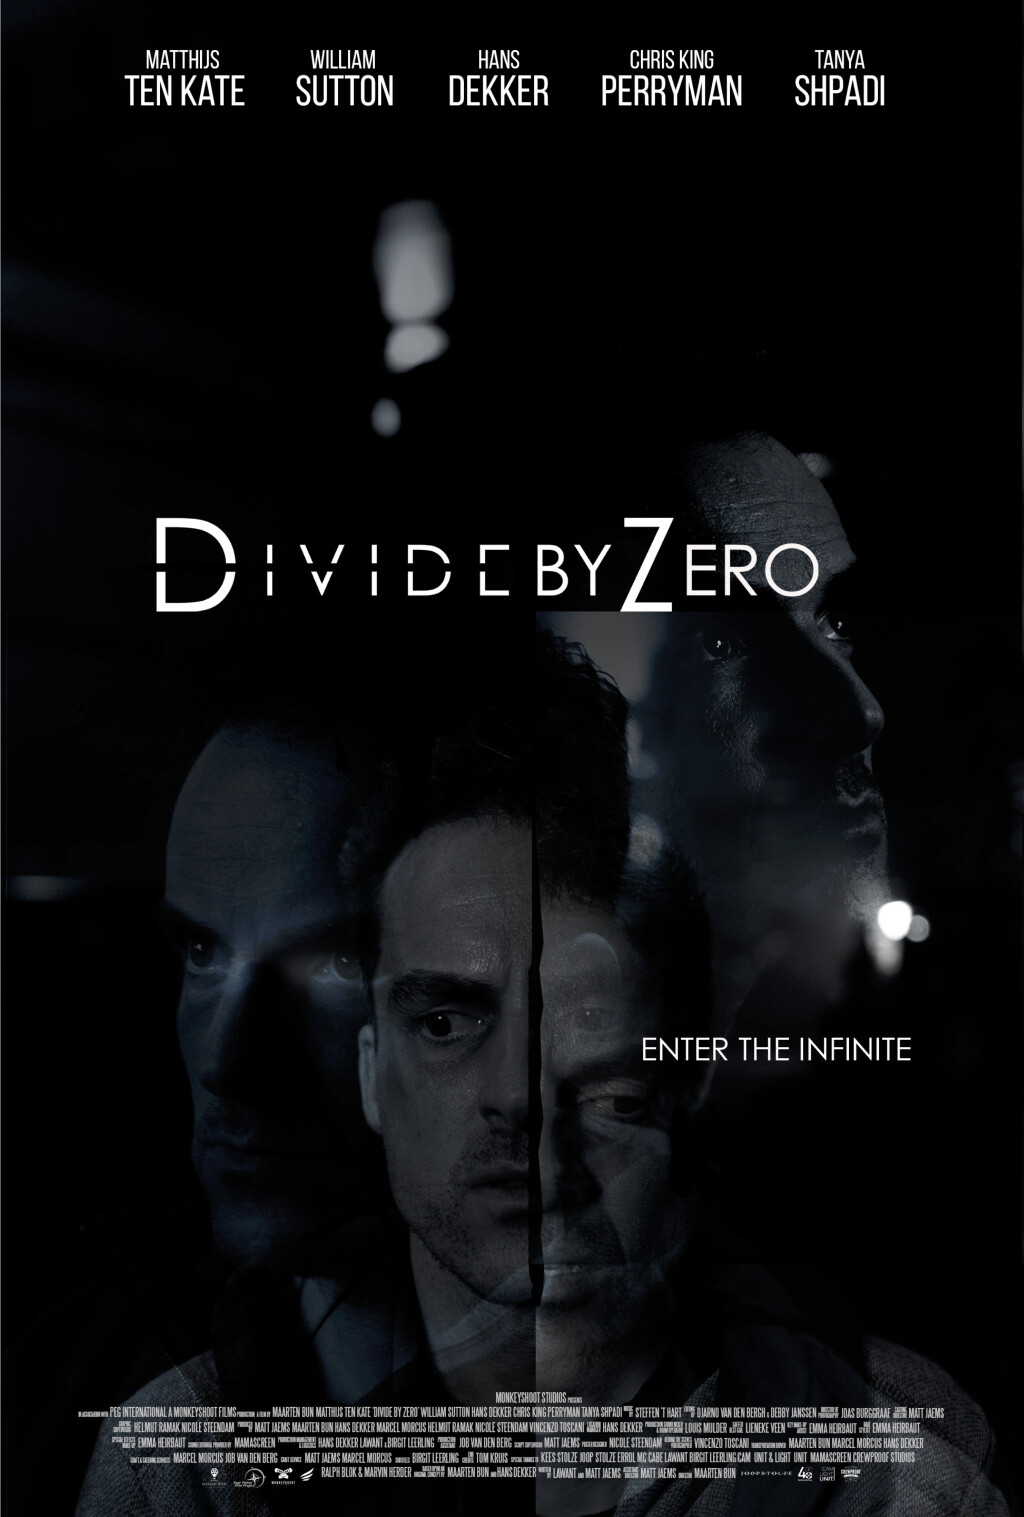 Filmposter for Divide by Zero